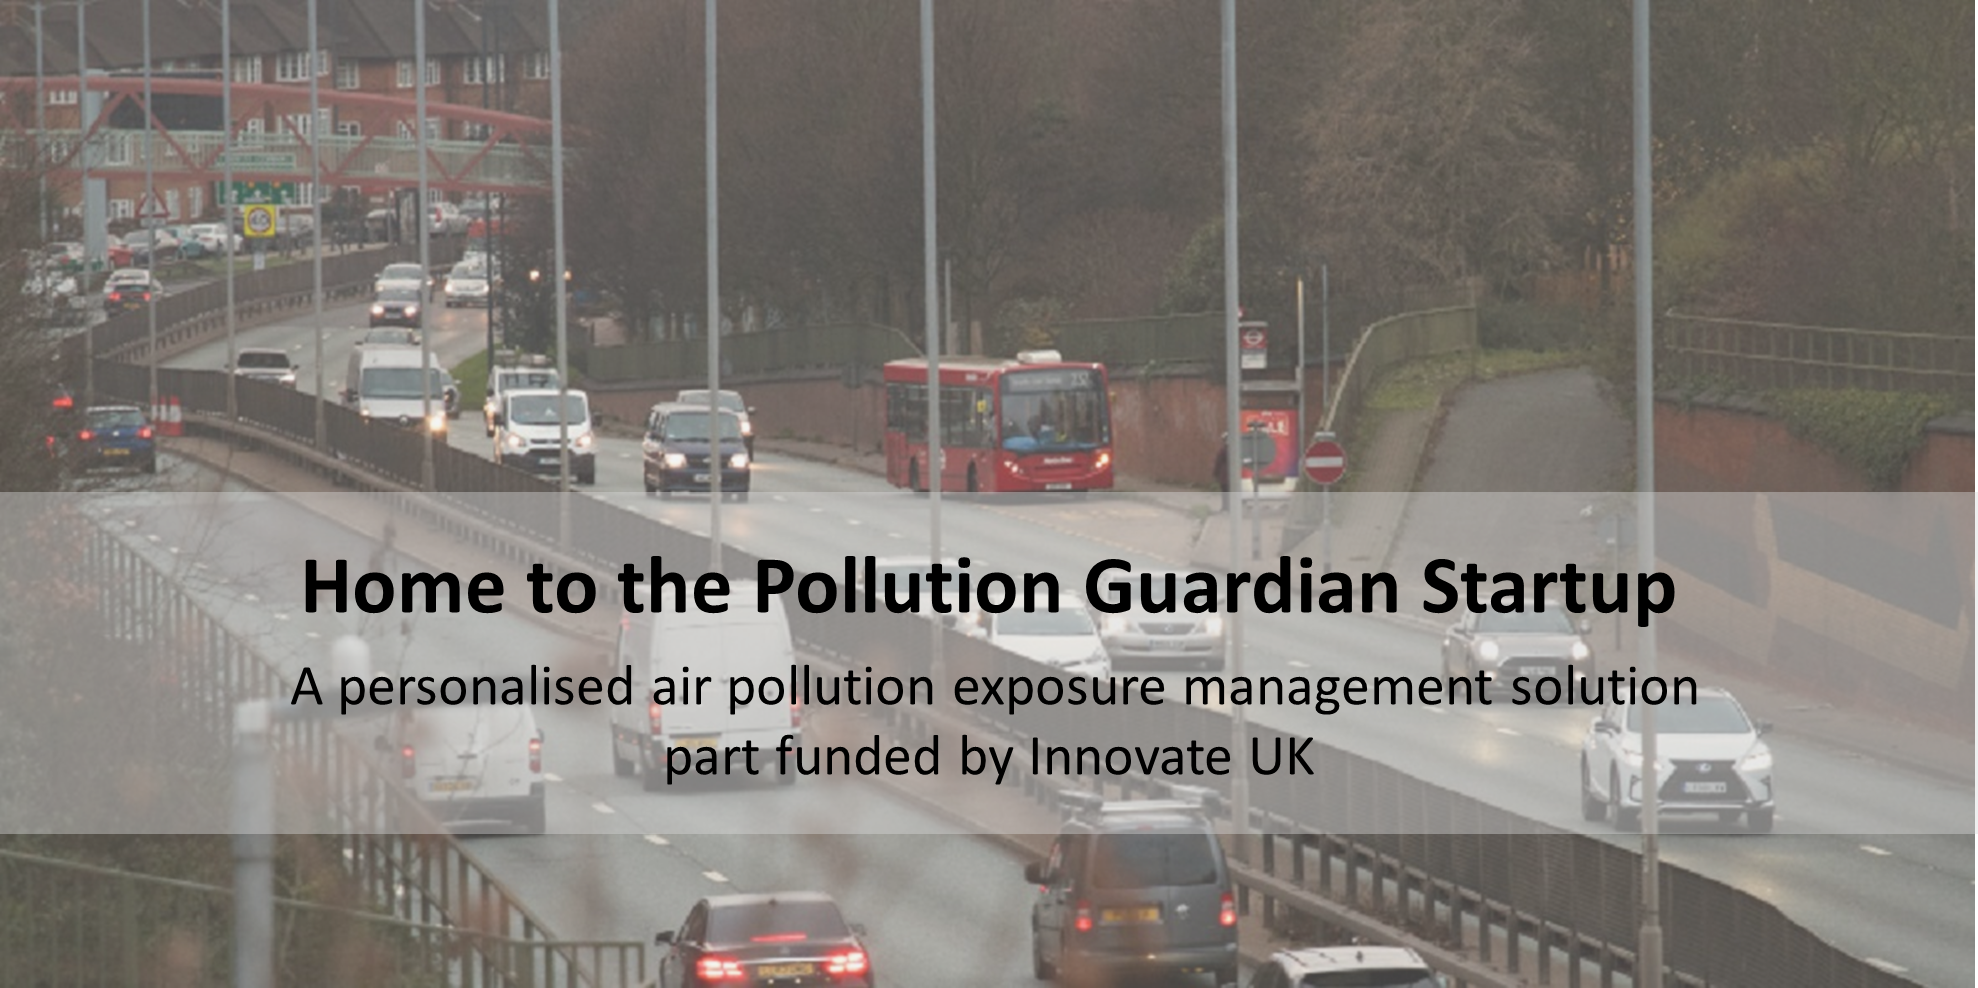 Pollution Guardian IoT solution for avoiding pollution